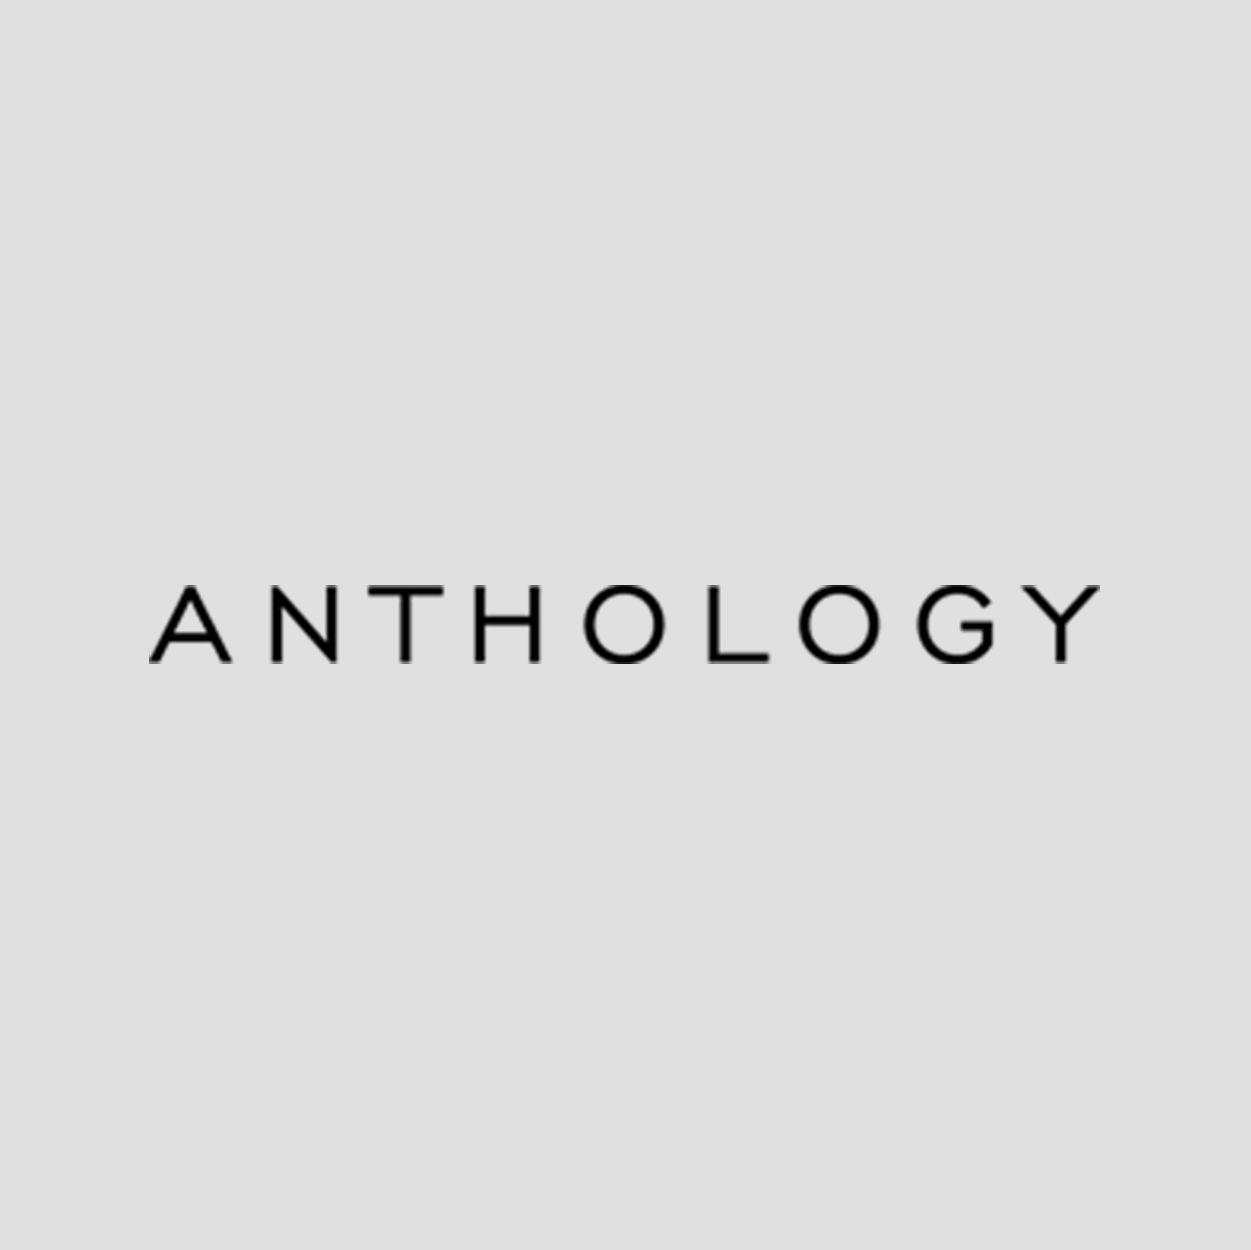 Anthology Logo - Anthology, luxury, industrial chic wallpaper Wallpaper Company